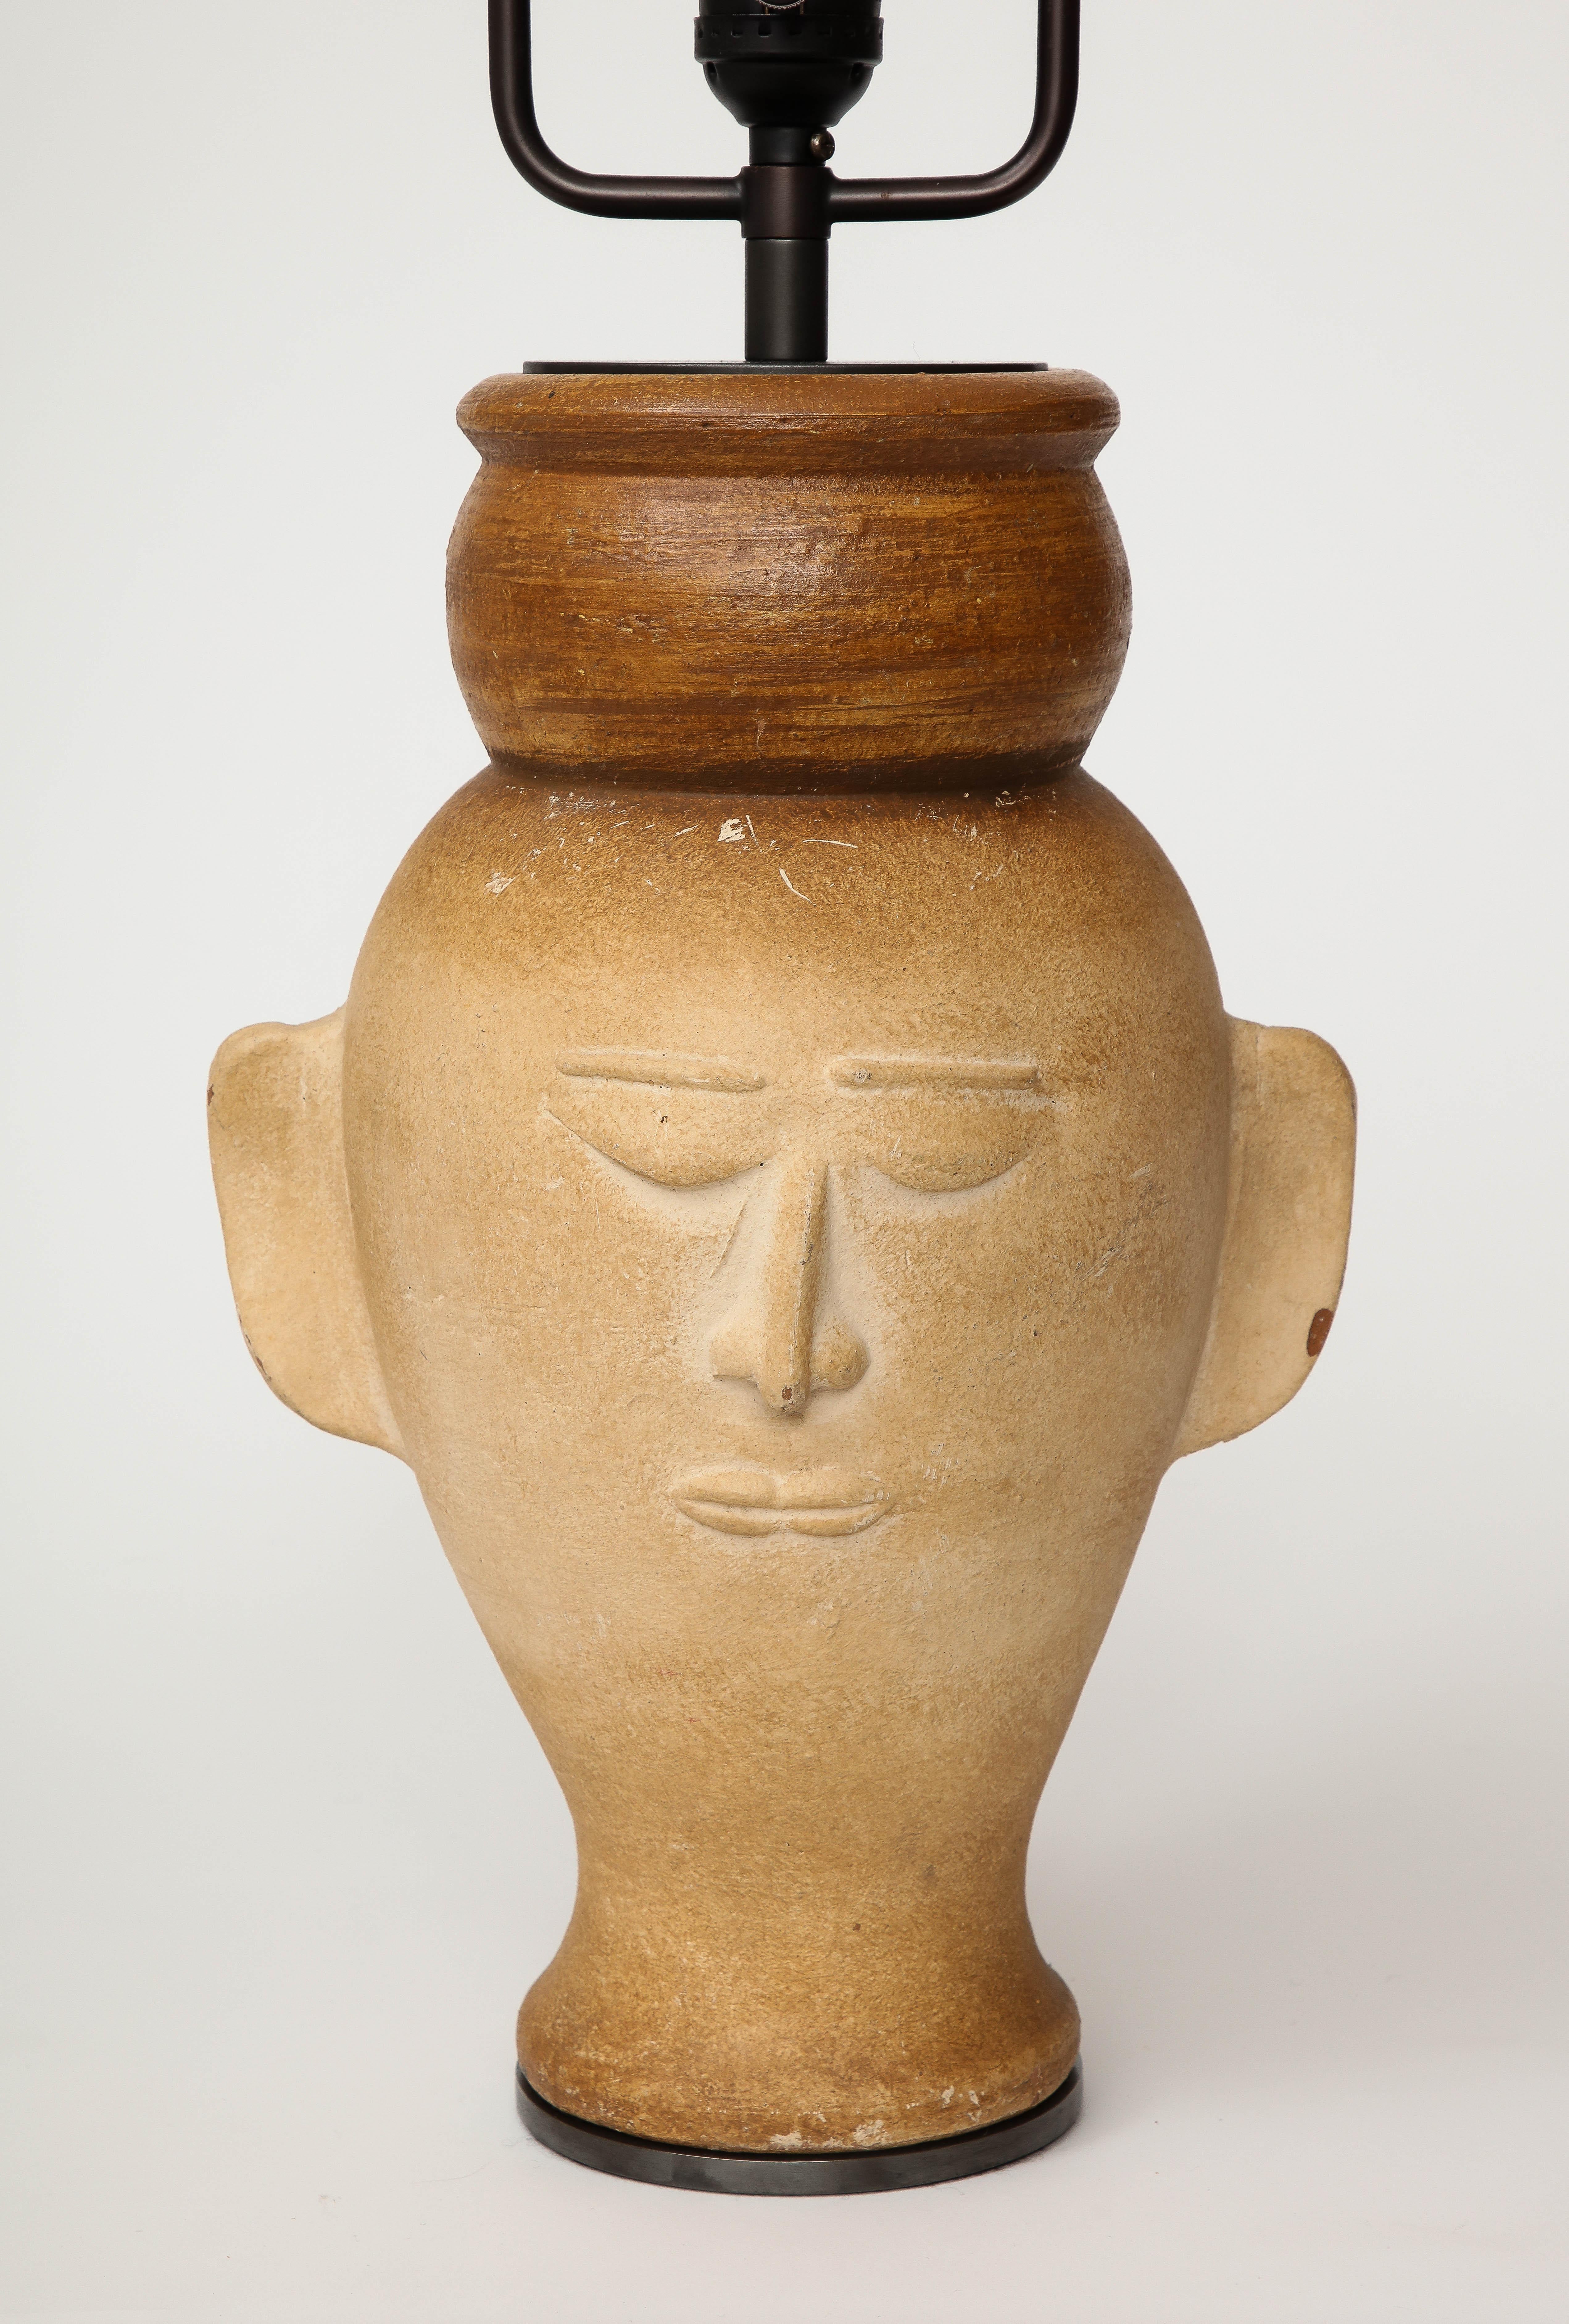 Terracotta Bust Table Lamp with Darkened Metal Base, 20th C. For Sale 1